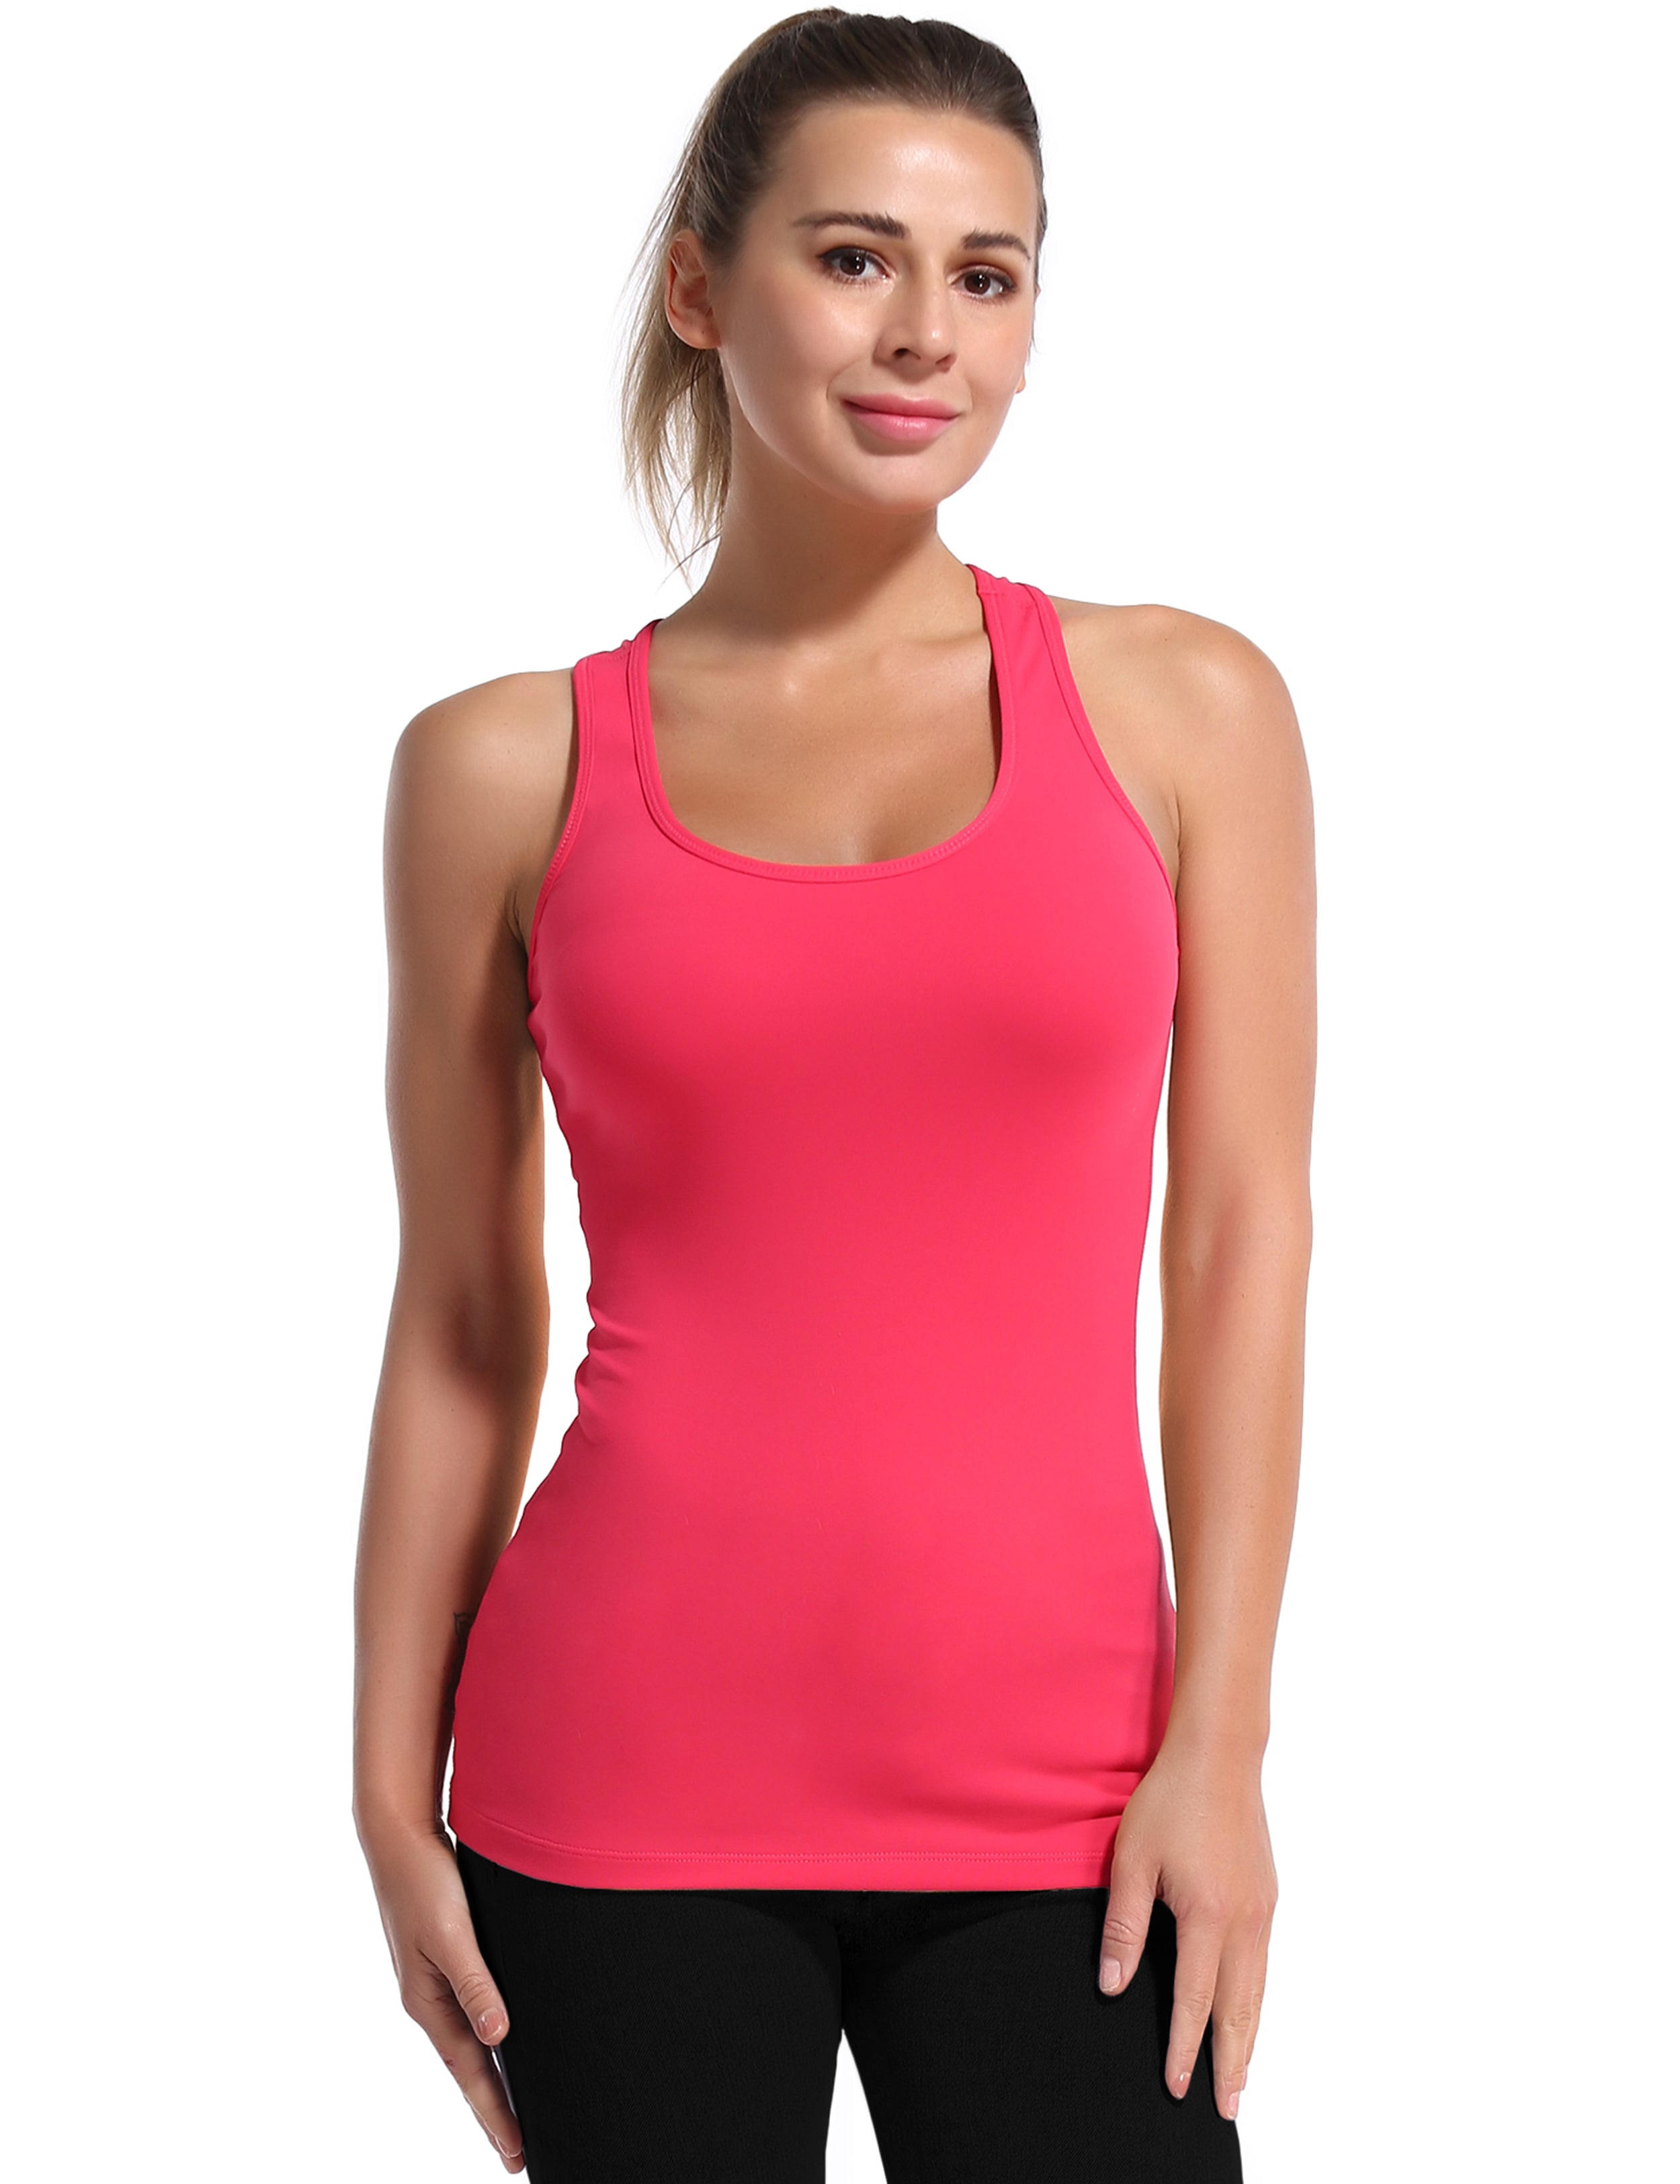 Racerback Athletic Tank Tops red 92%Nylon/8%Spandex(Cotton Soft) Designed for Yoga Tight Fit So buttery soft, it feels weightless Sweat-wicking Four-way stretch Breathable Contours your body Sits below the waistband for moderate, everyday coverage